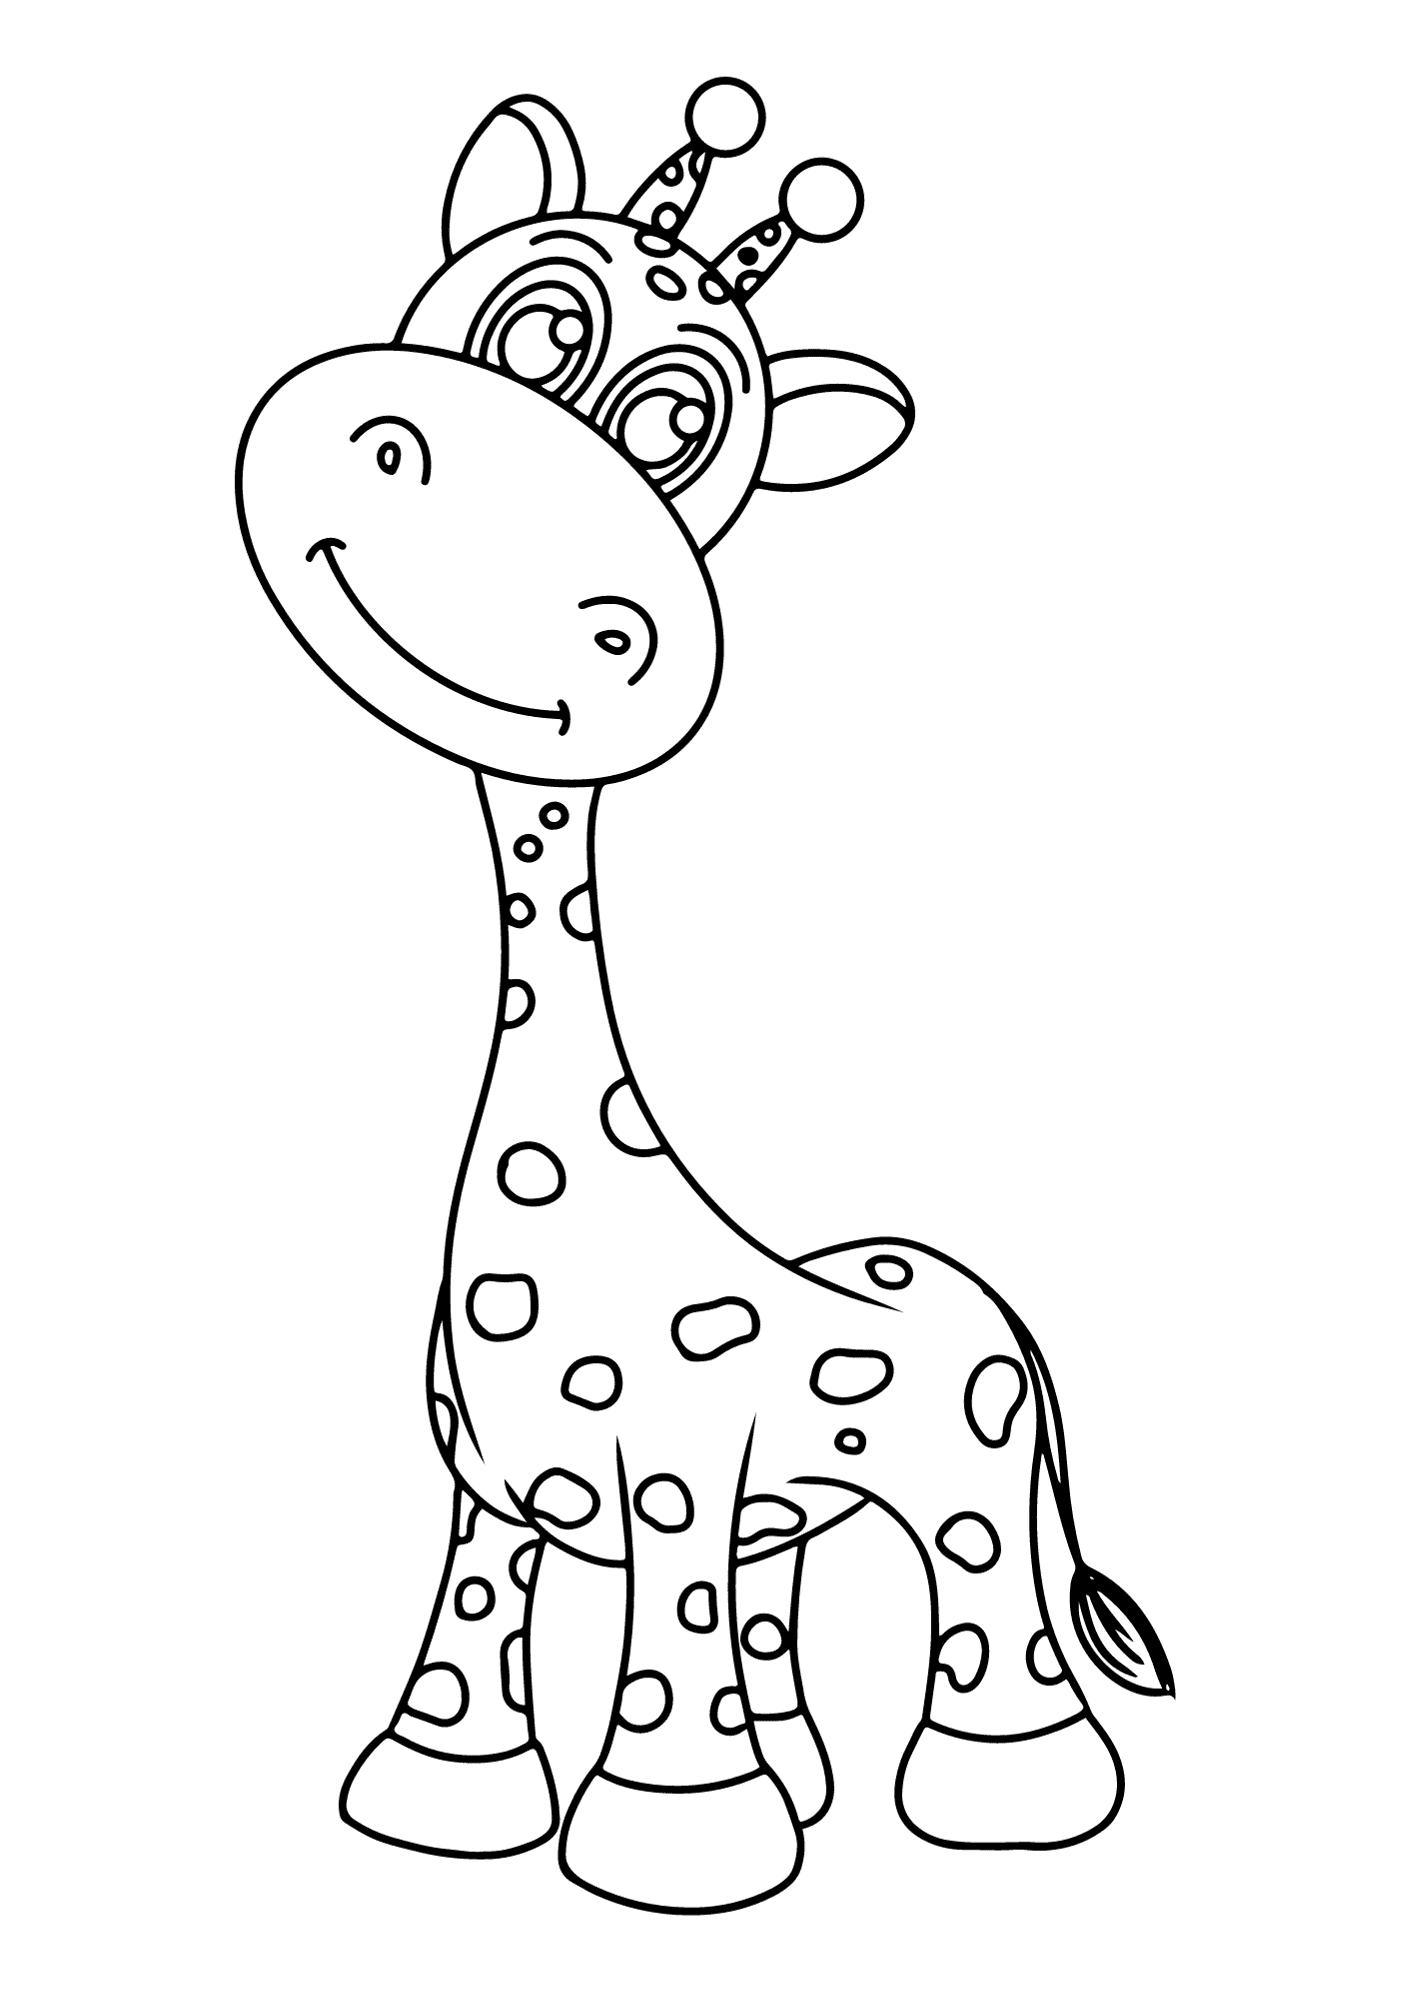 Giraffe For Children Image Coloring Page